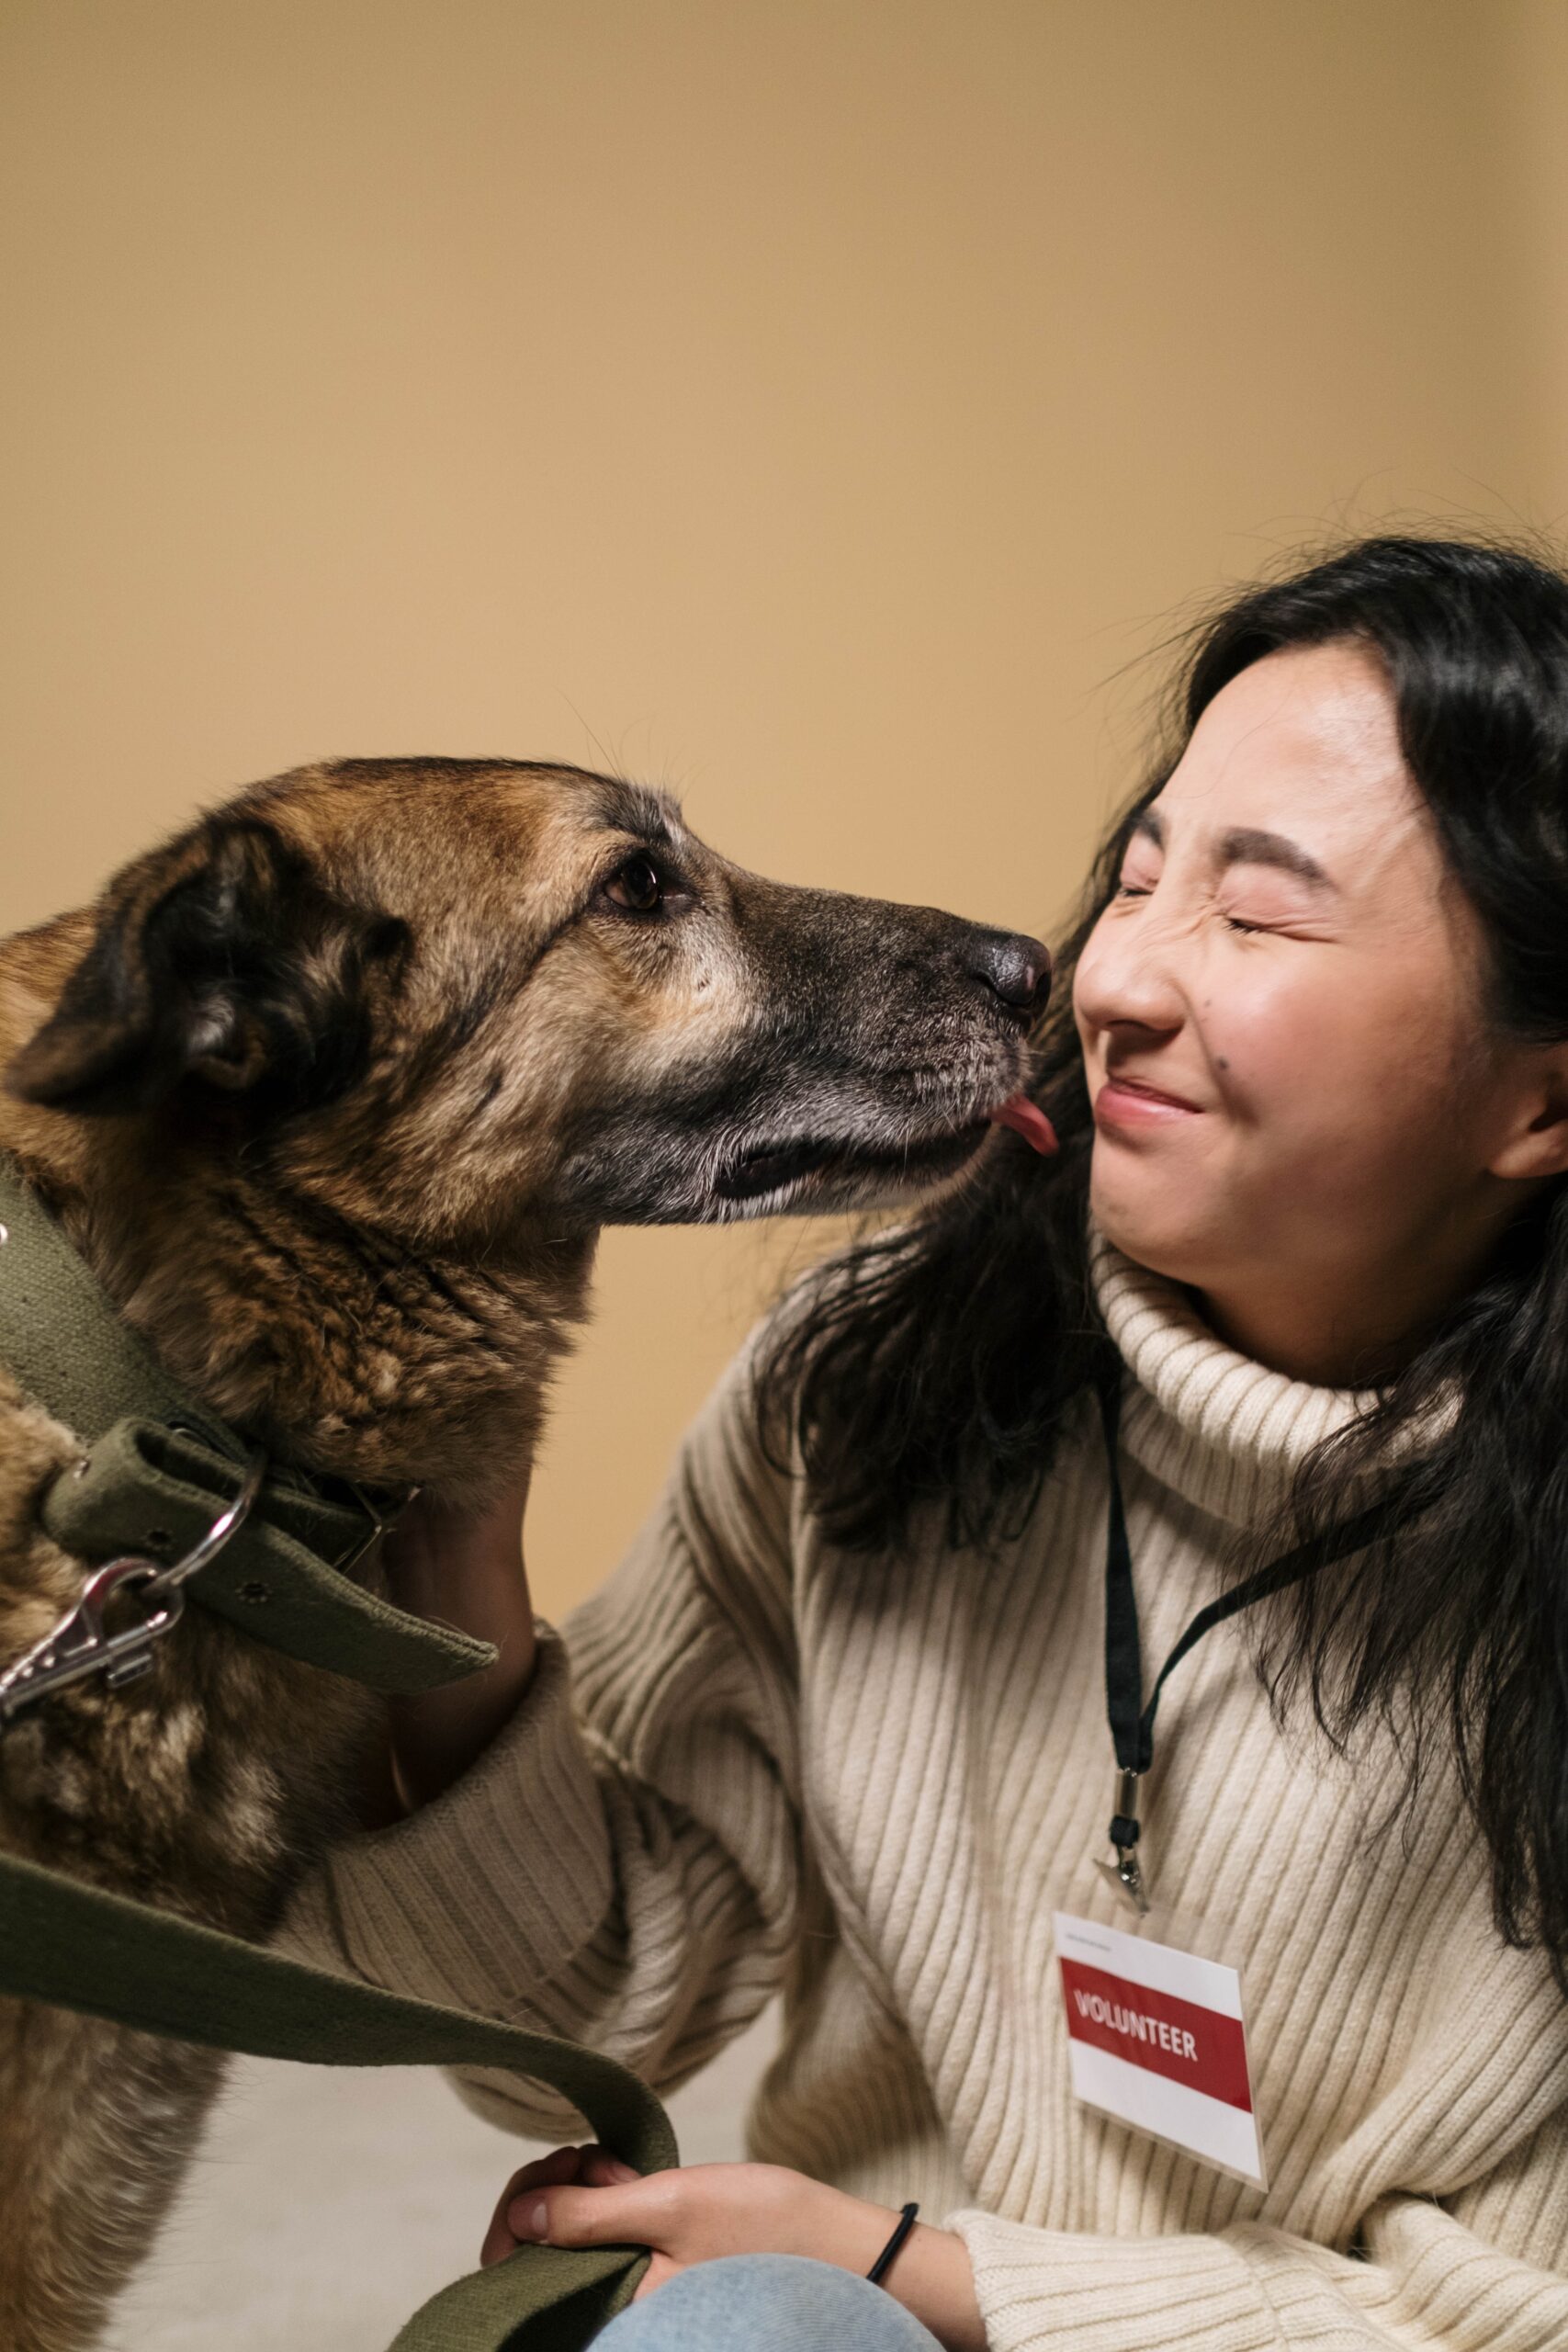 woman smiling and dog about to lick her face